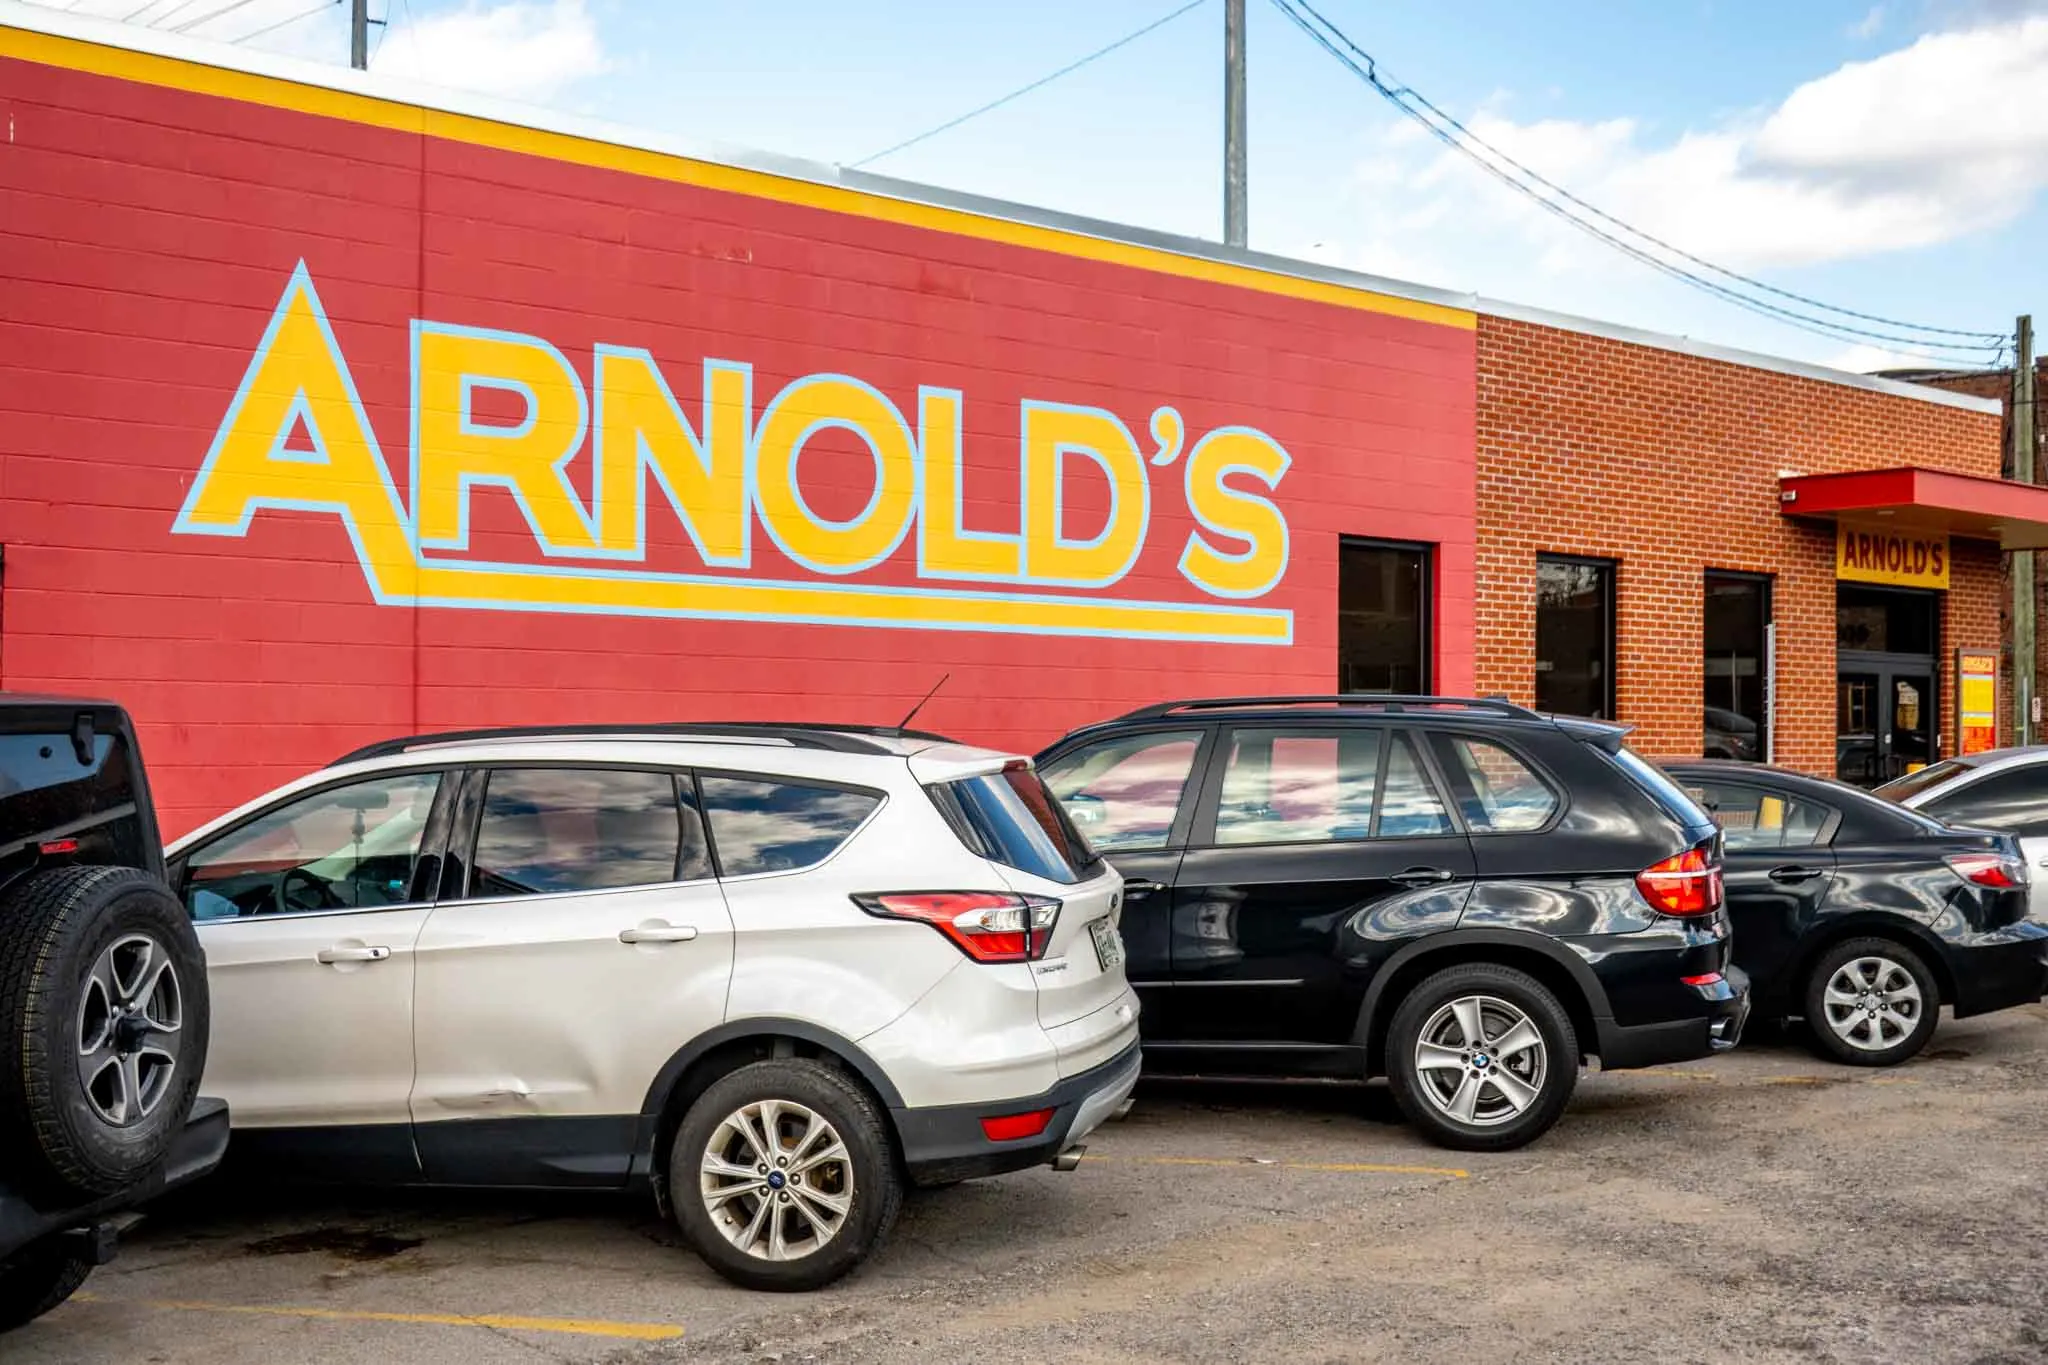 Yellow and red sign for Arnold's restaurant pained on a brick wall